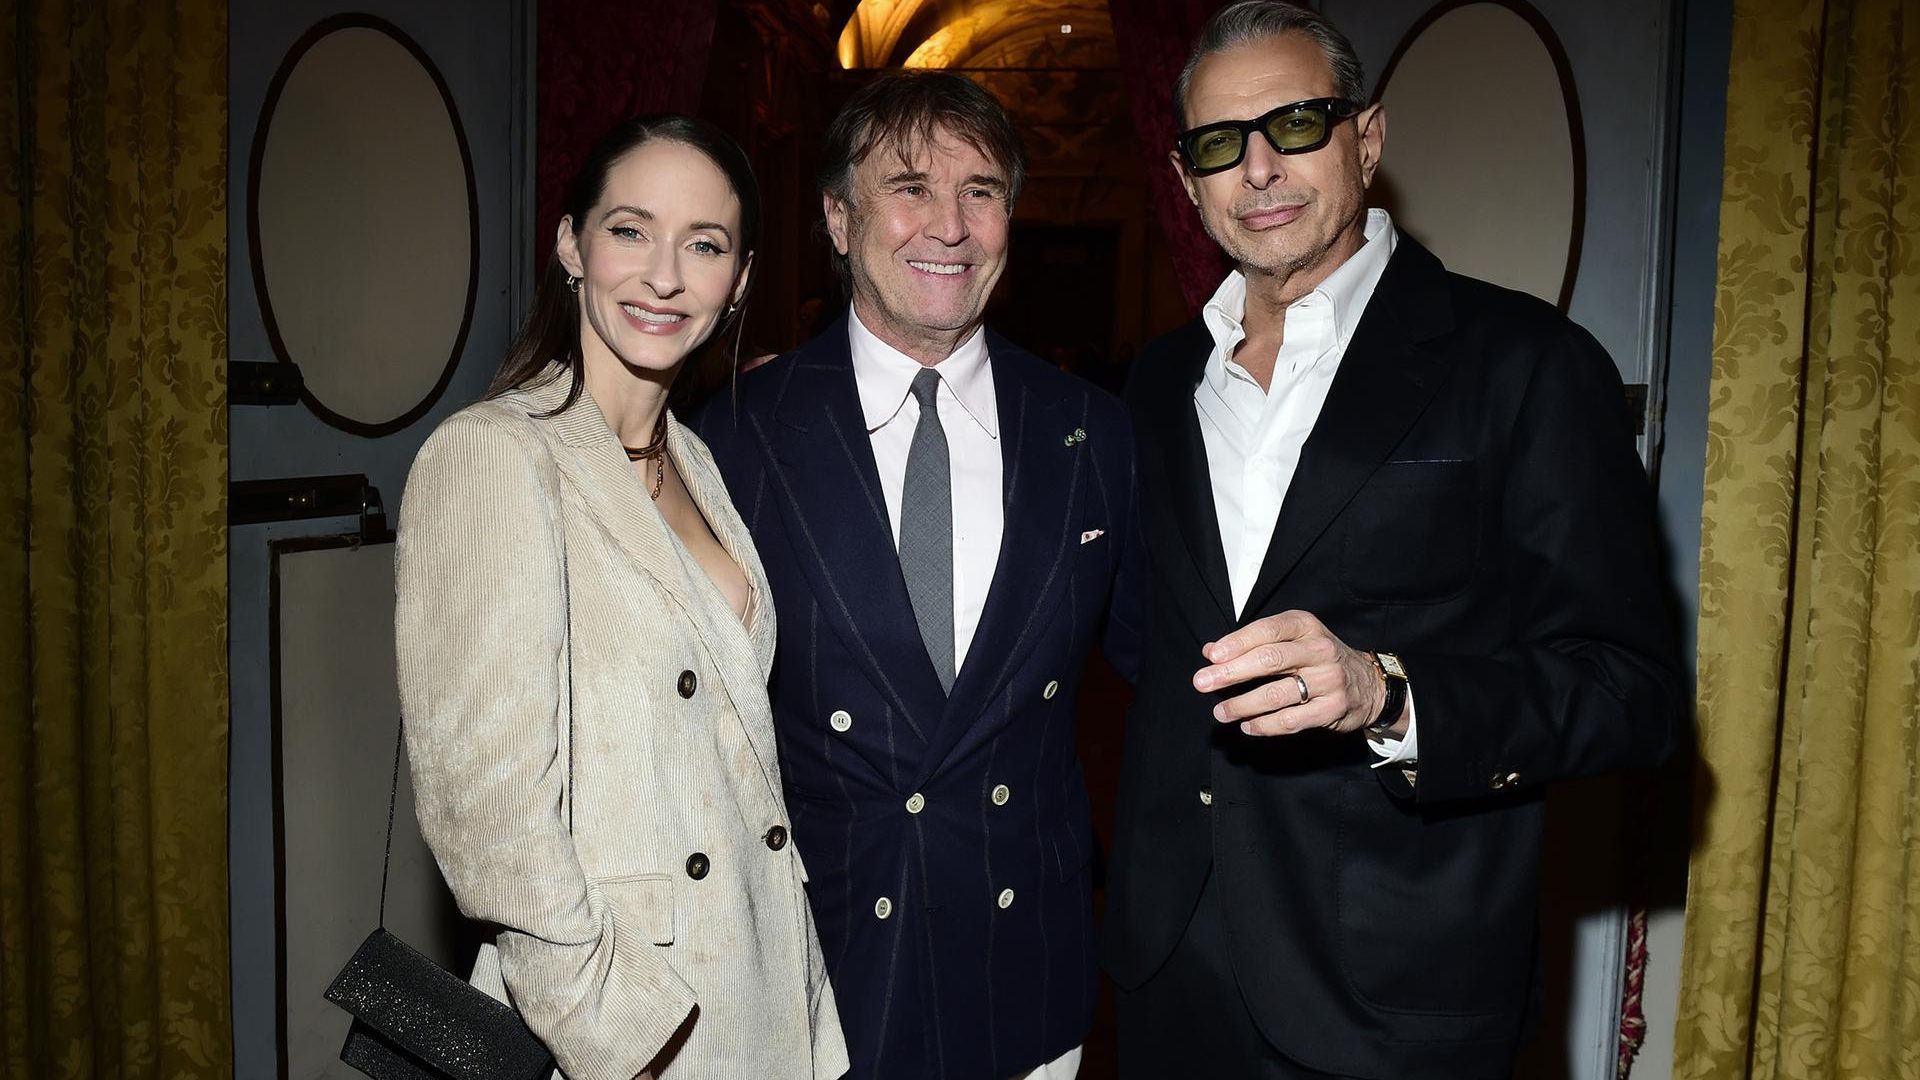 Jeff Goldblum, Lucky Blue Smith attended Brunello Cucinelli's Pitti Diner in Florence